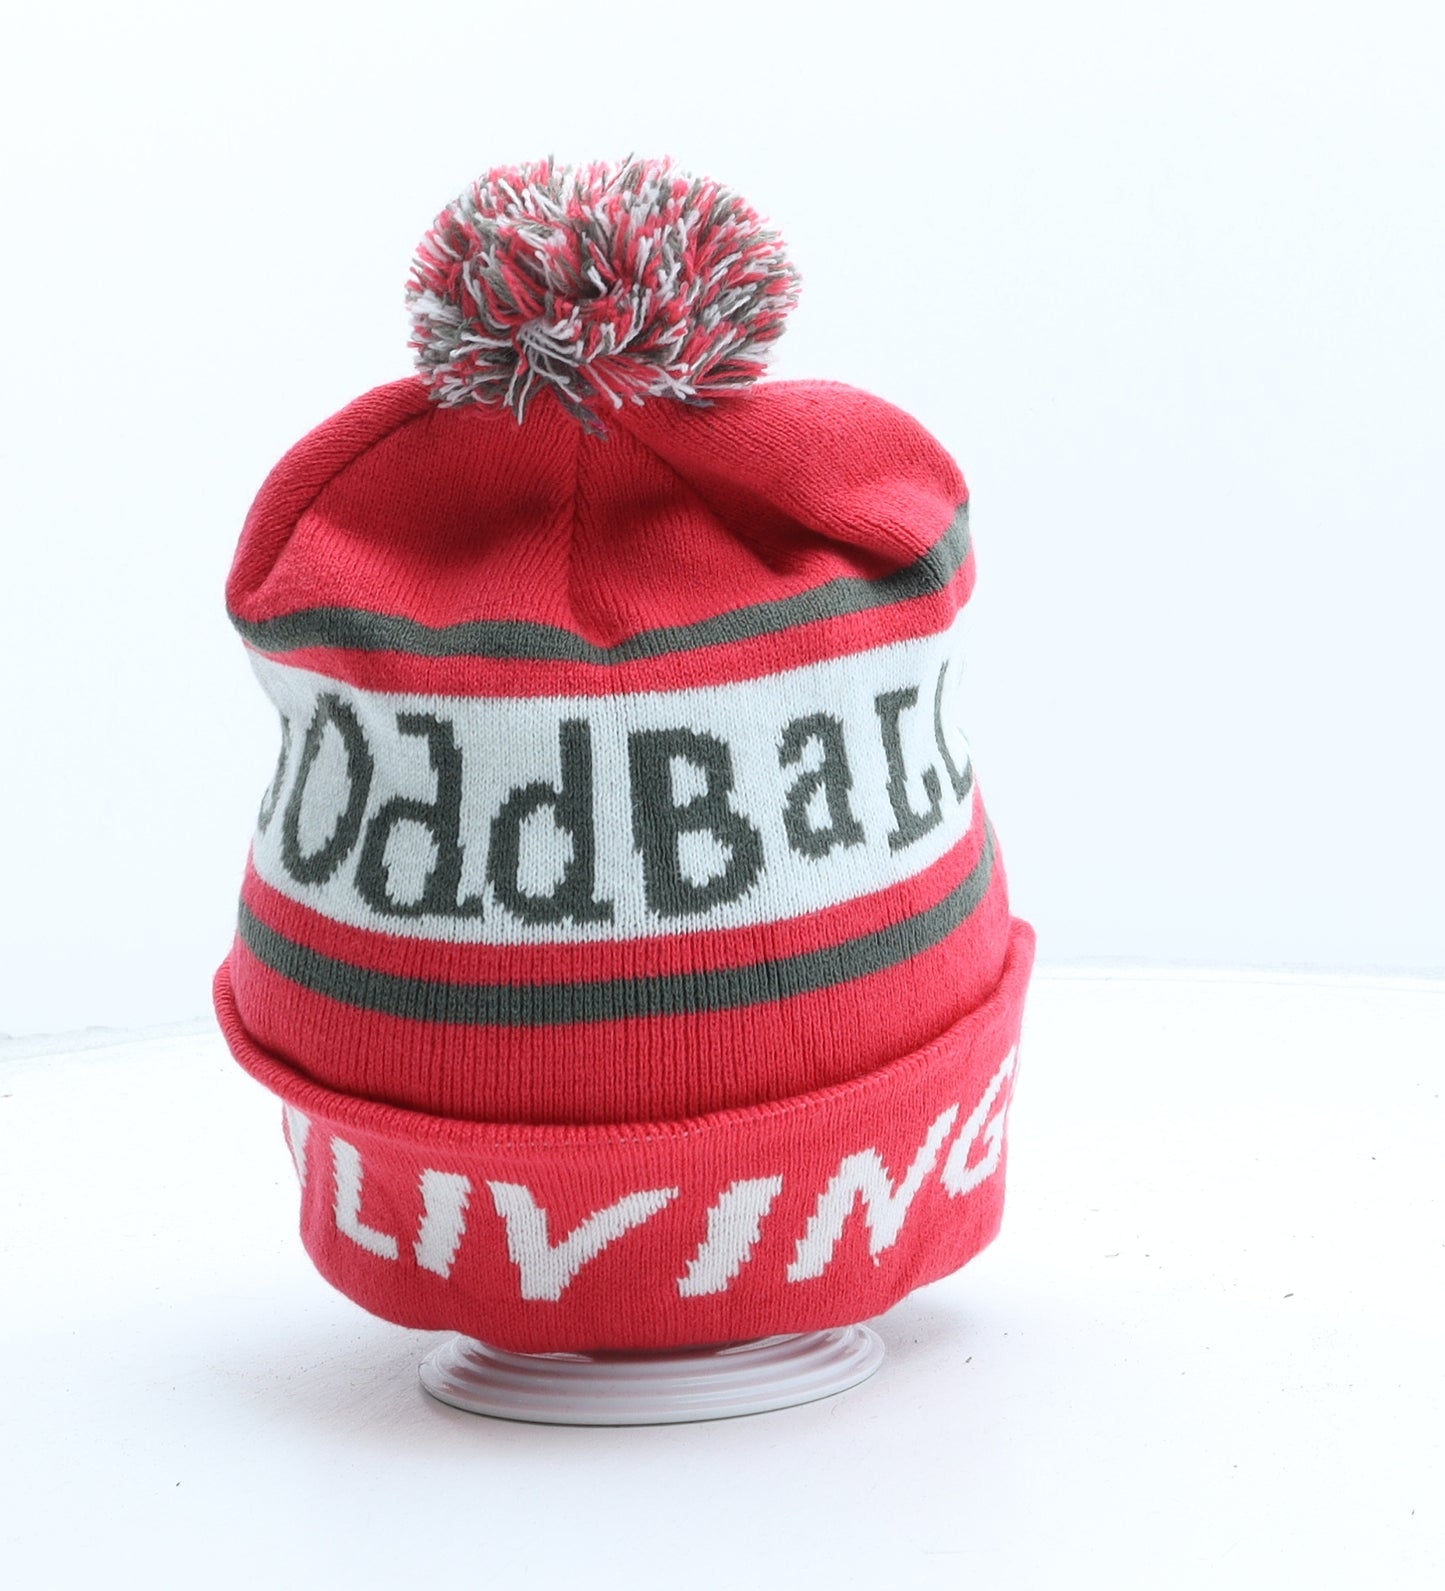 Odd Balls Womens Pink Striped Acrylic Bobble Hat One Size - Get Busy Living